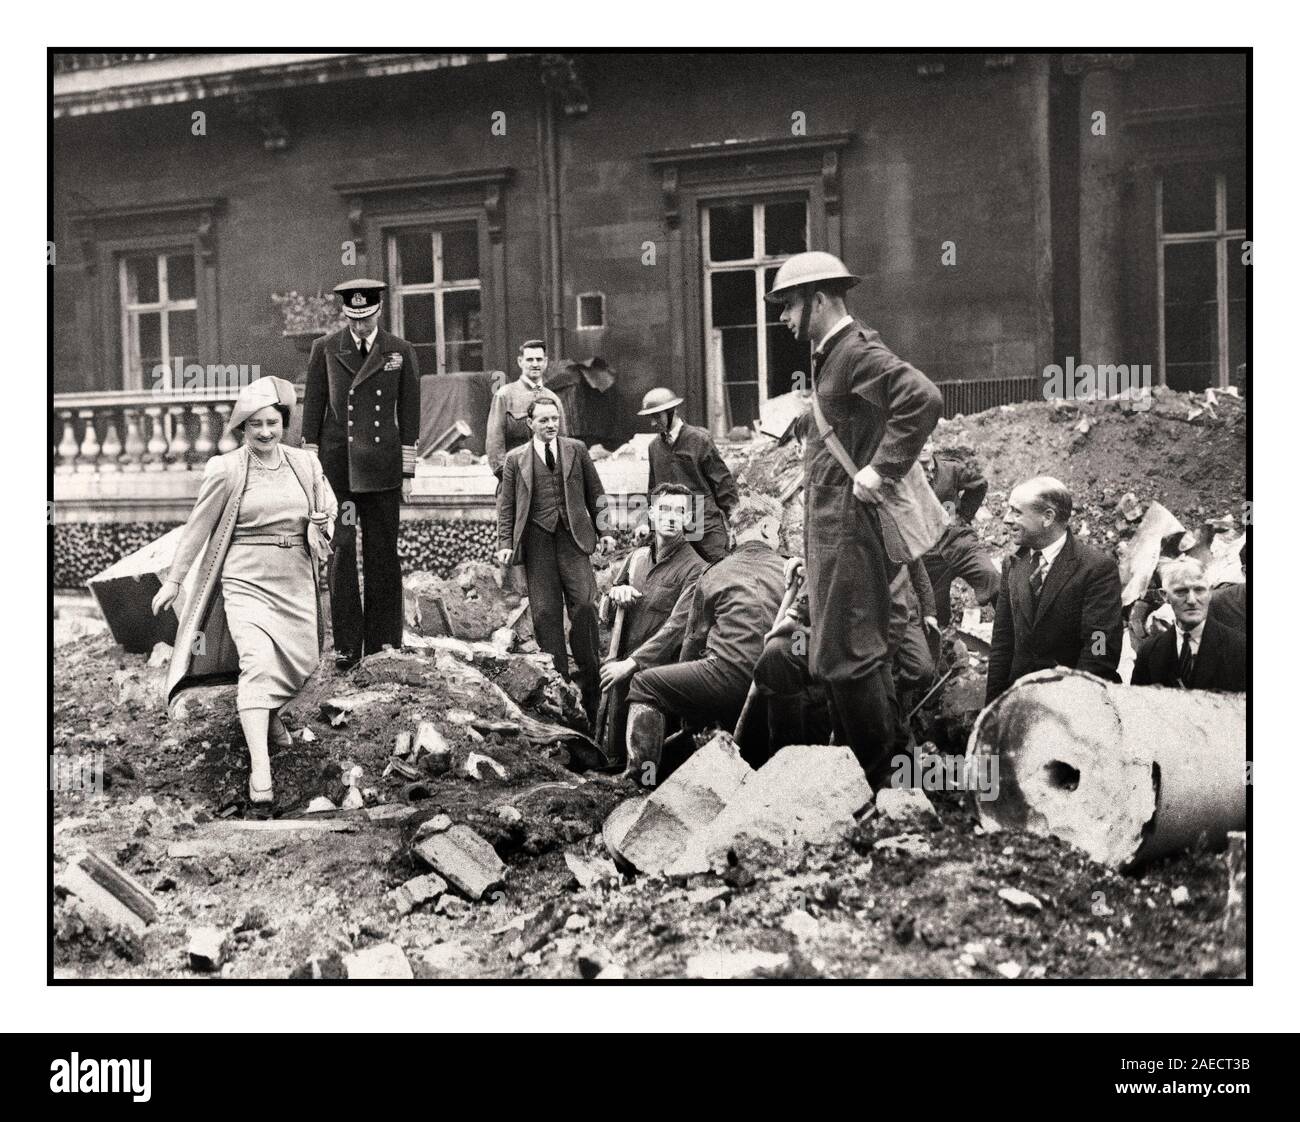 1940's London Blitz Royal Family Vintage WW2 image of King George VI and Queen Elizabeth inspecting the bomb damage at Buckingham Palace London during World War II  giving a morale boost to the workers clearing the rubble. Elizabeth and her husband King George VI embodied the spirit of British stoicism during the major conflict. In 1940, as London was blitzed relentlessly by the Germans, Queen Elizabeth and the King would tirelessly tend to those affected by the bombing offensive, visiting bombed civilians and devastated businesses and industries. Stock Photo